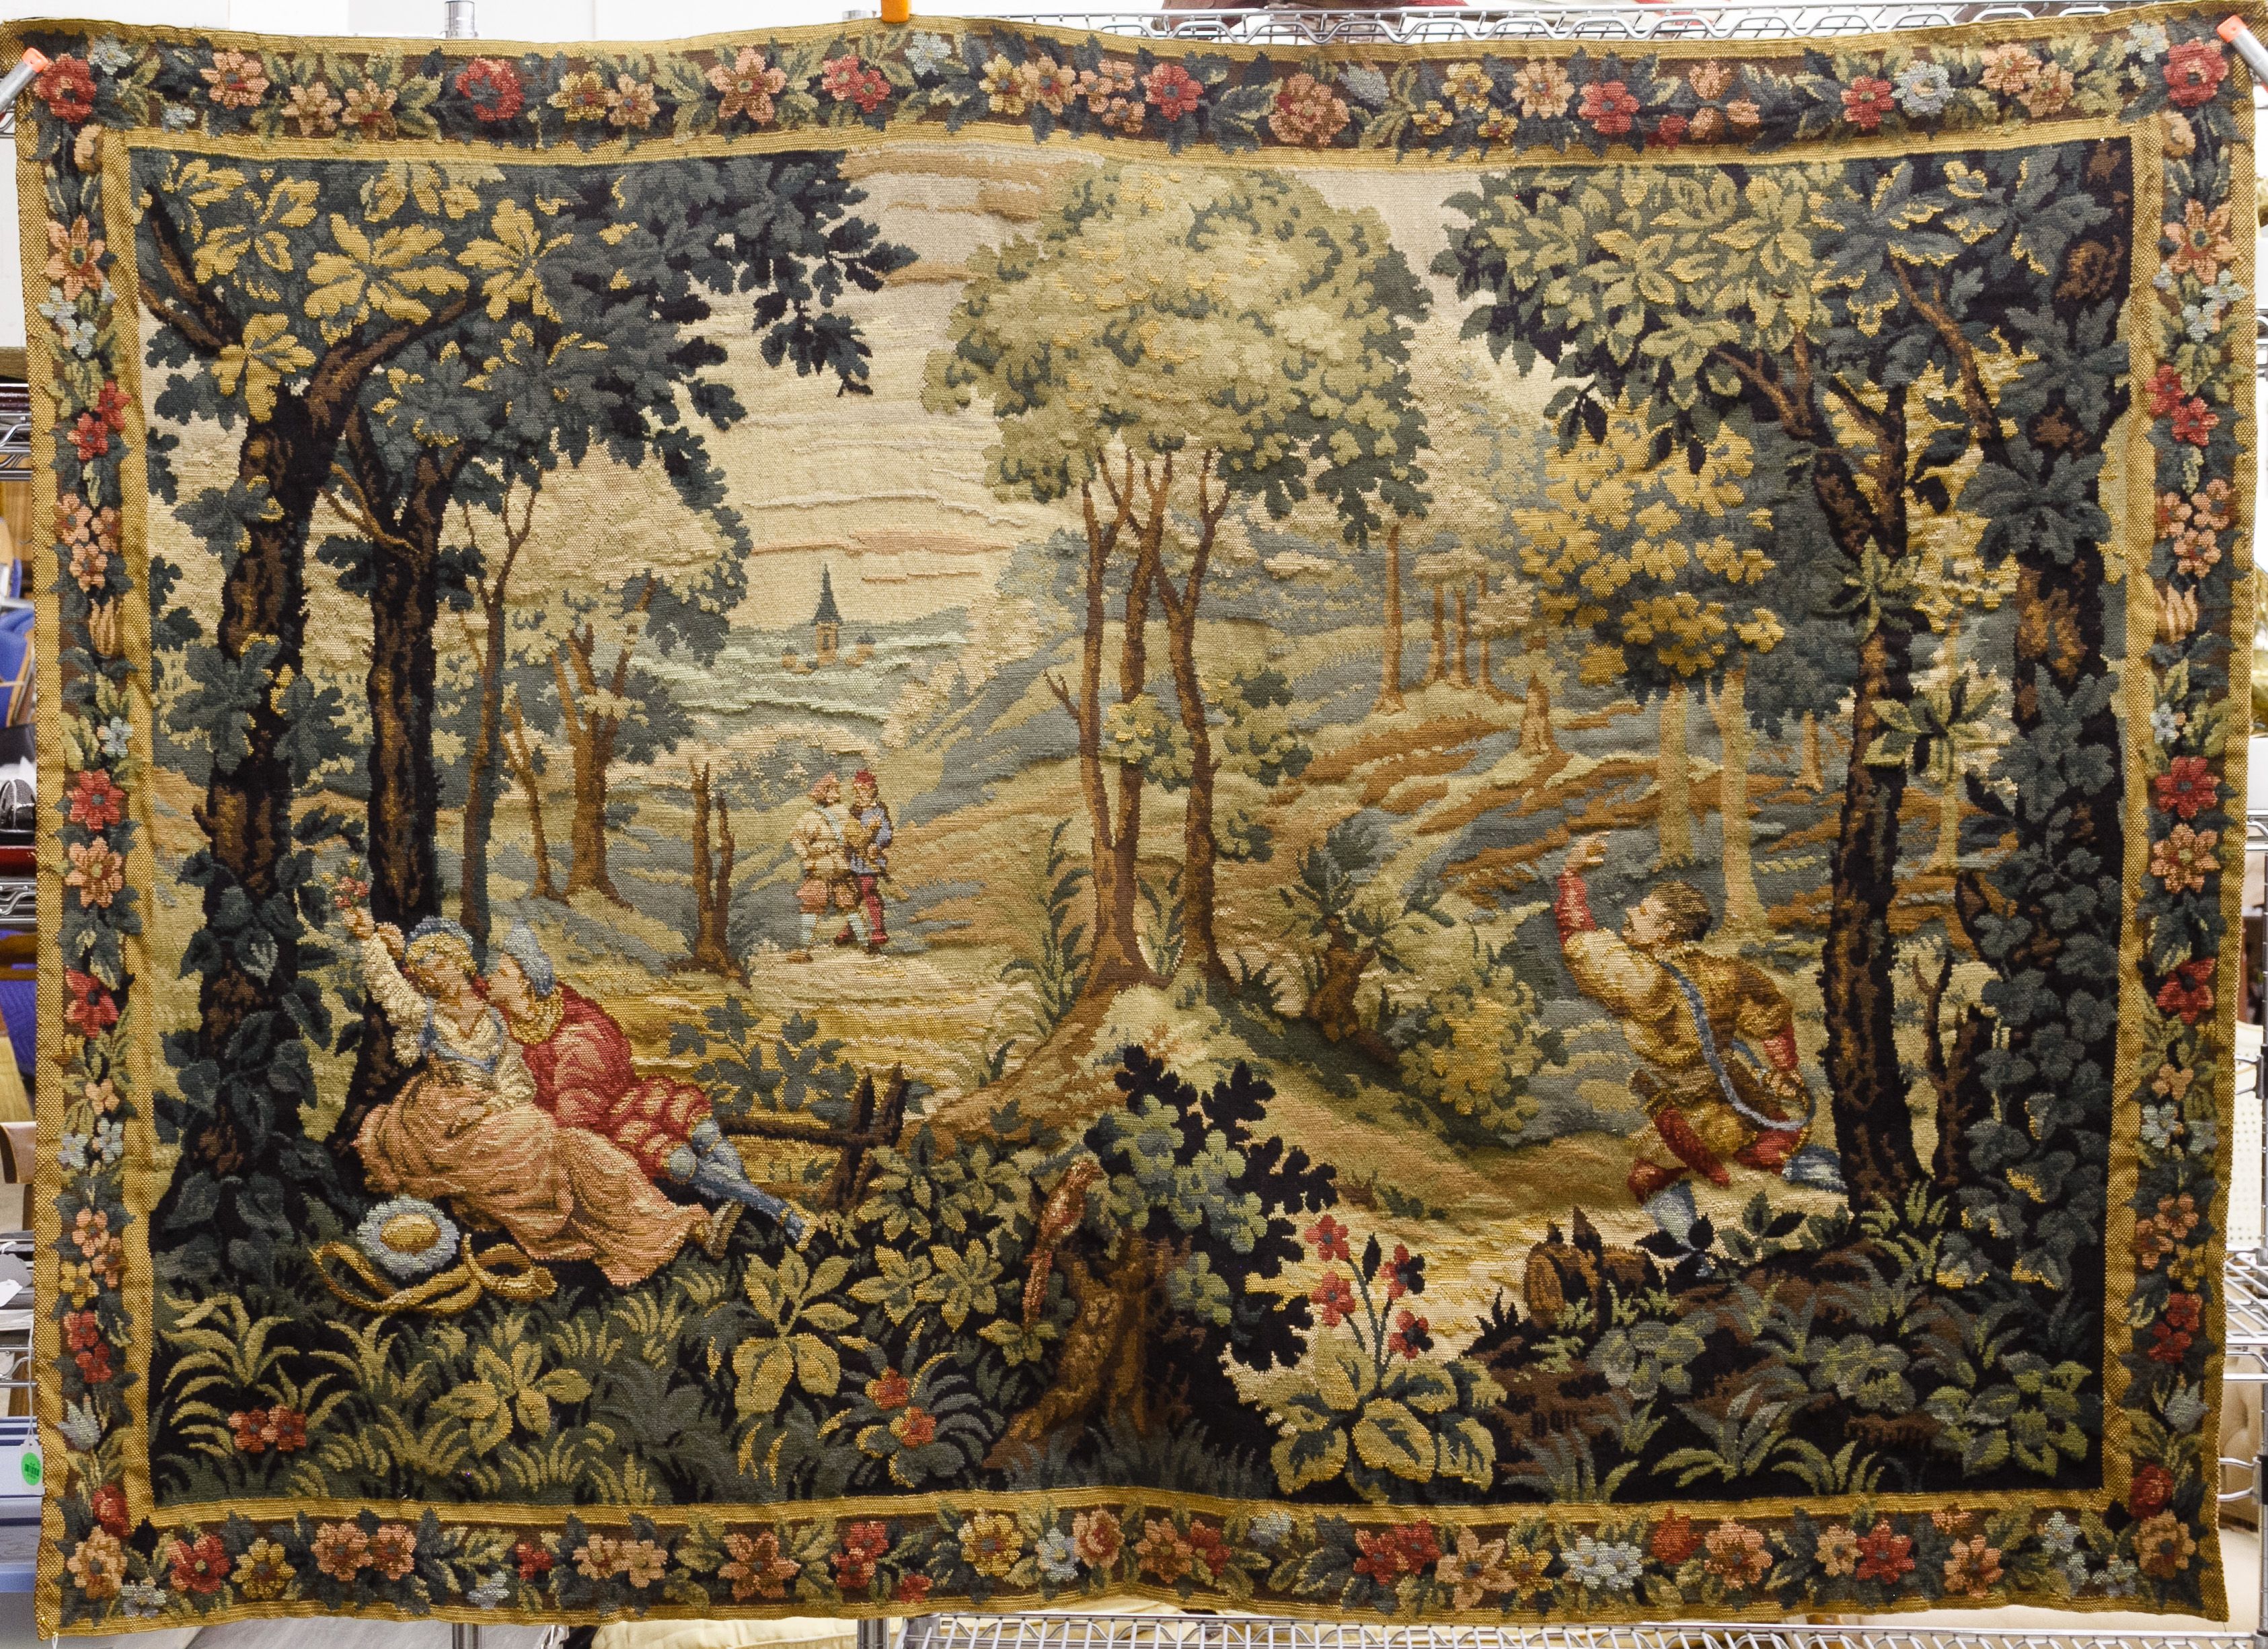 Lot 247: Hand Stitched Pictoral Wool Tapestry; Having an 18th ...